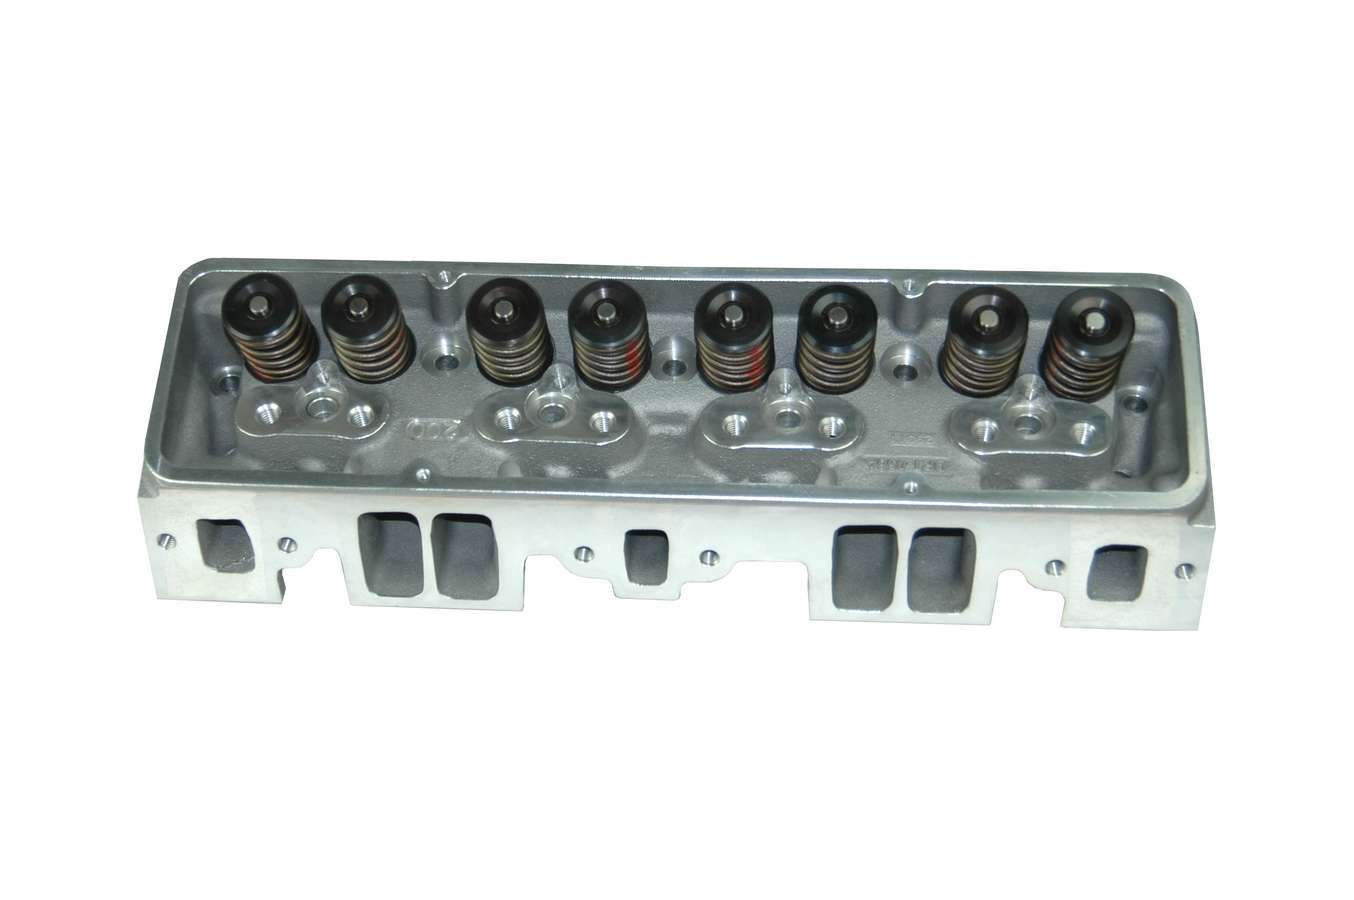 DART Cylinder Head, SHP, Assembled, 2.020 / 1.600 in Valve, 200 cc Intake, 64 cc Chamber, 1.437 in Springs, Straight Plug, Aluminum, Small Block Chevy